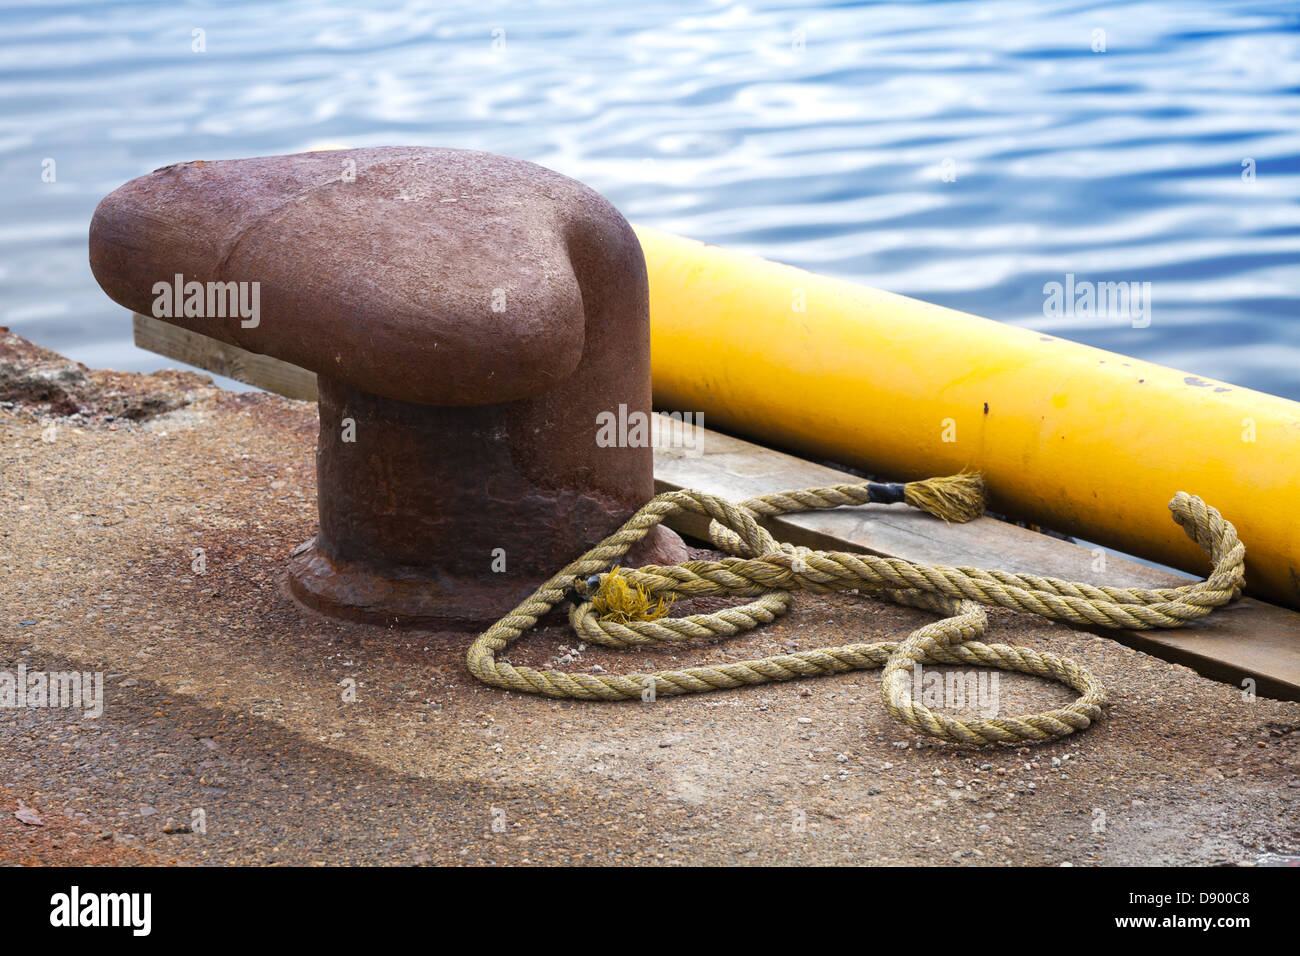 Old rusted mooring bollard with naval rope on concrete pier Stock Photo